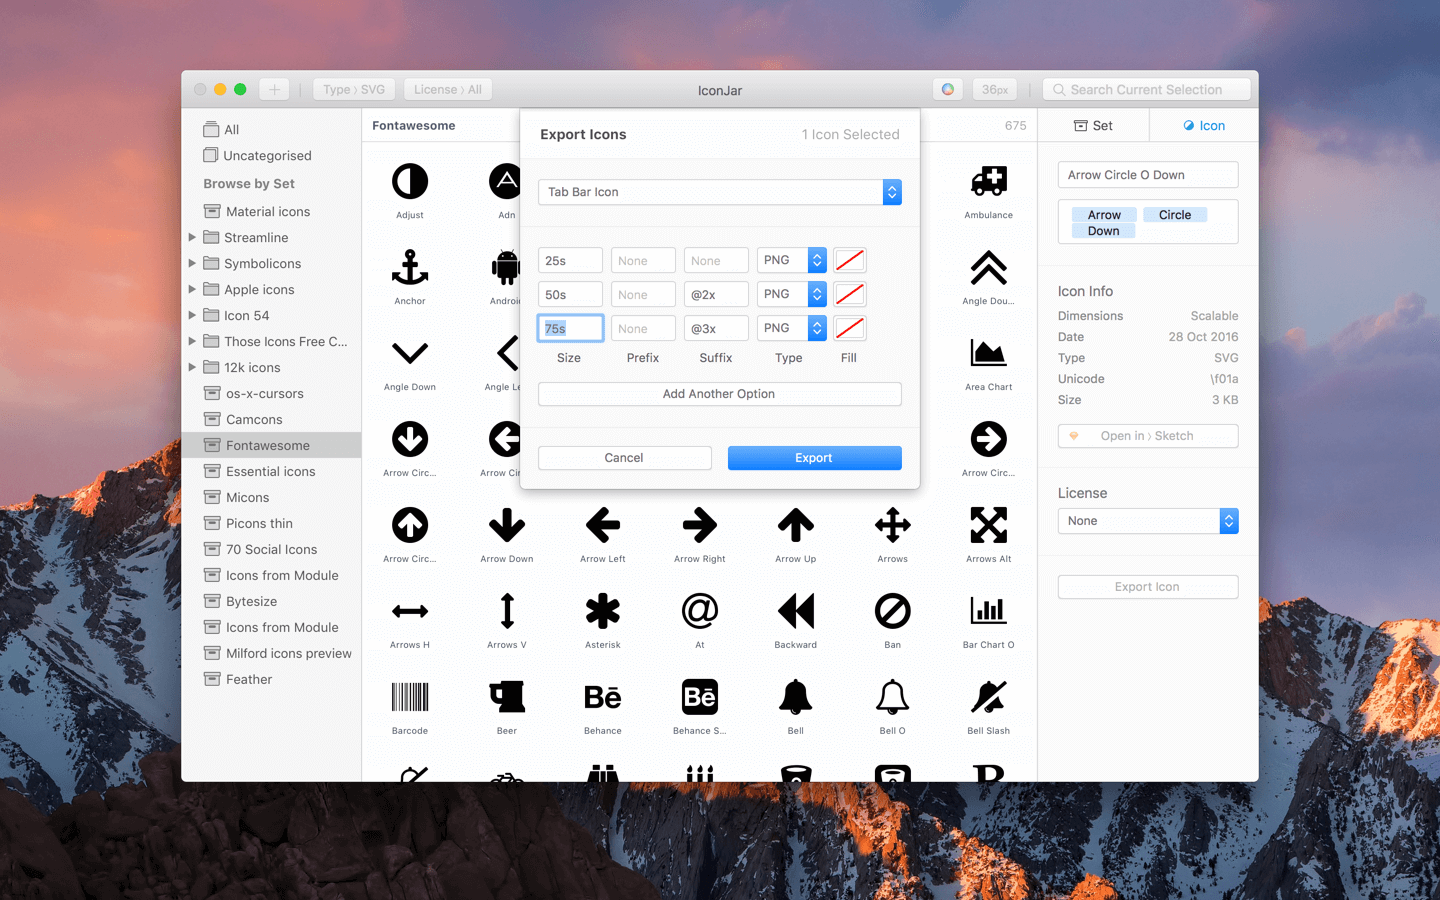 Export icons